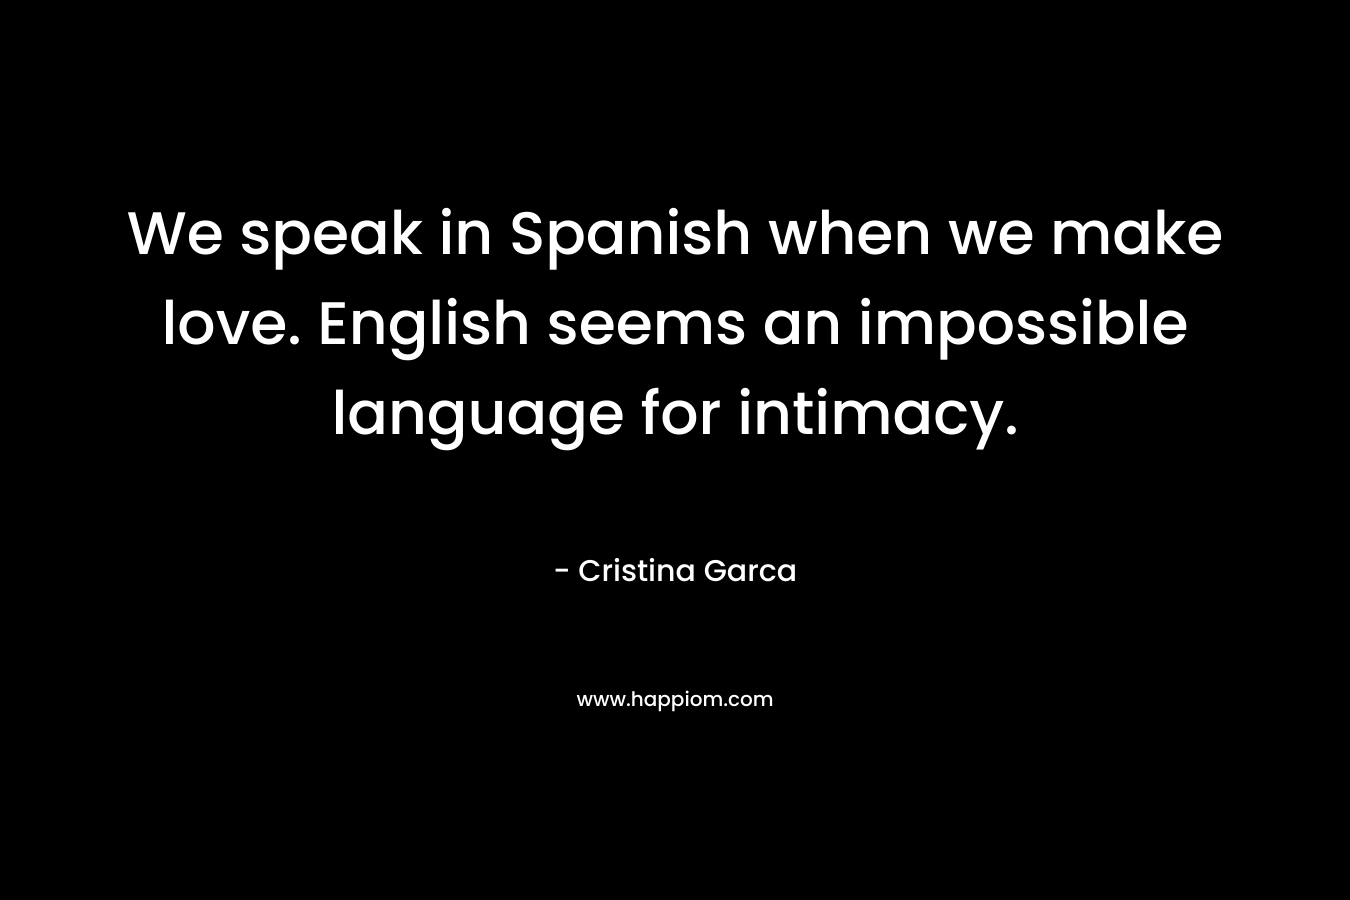 We speak in Spanish when we make love. English seems an impossible language for intimacy.